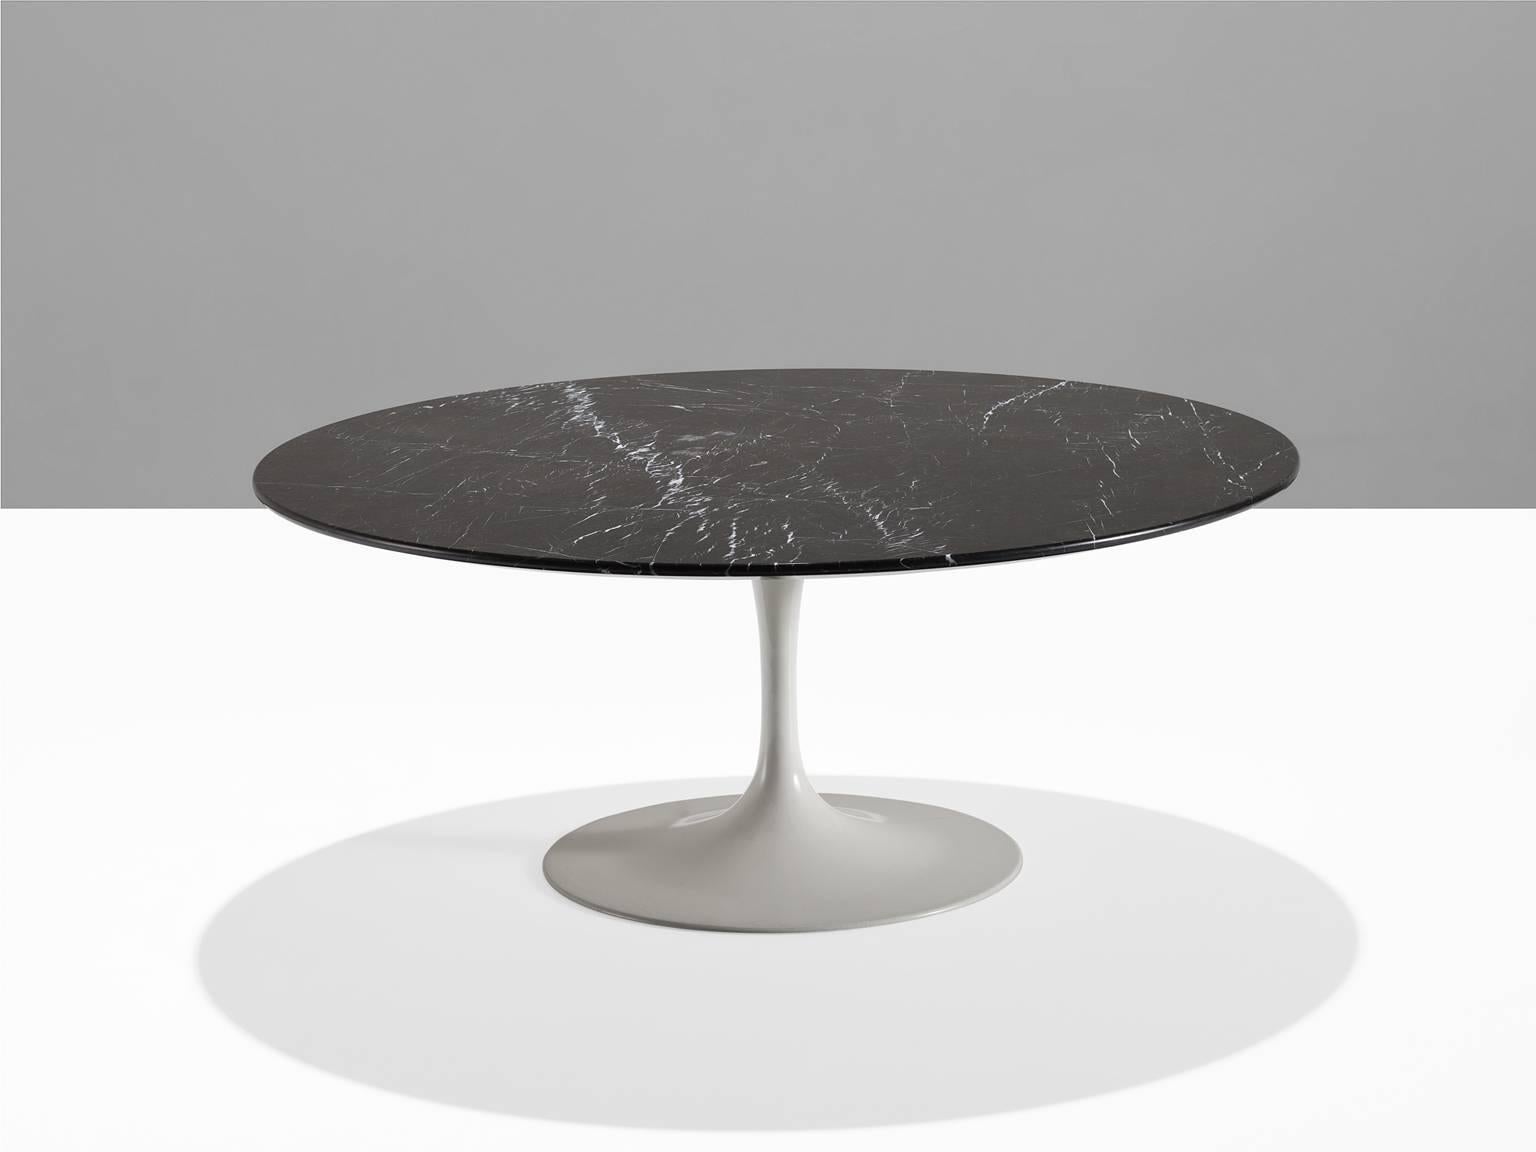 Cocktail table, Nero Marquina marble top, United States, 1957.

This round iconic tulip table is designed by Eero Saarinen in the fifties and it took him five years to arrive at this exact design. The table was designed to create peaceful